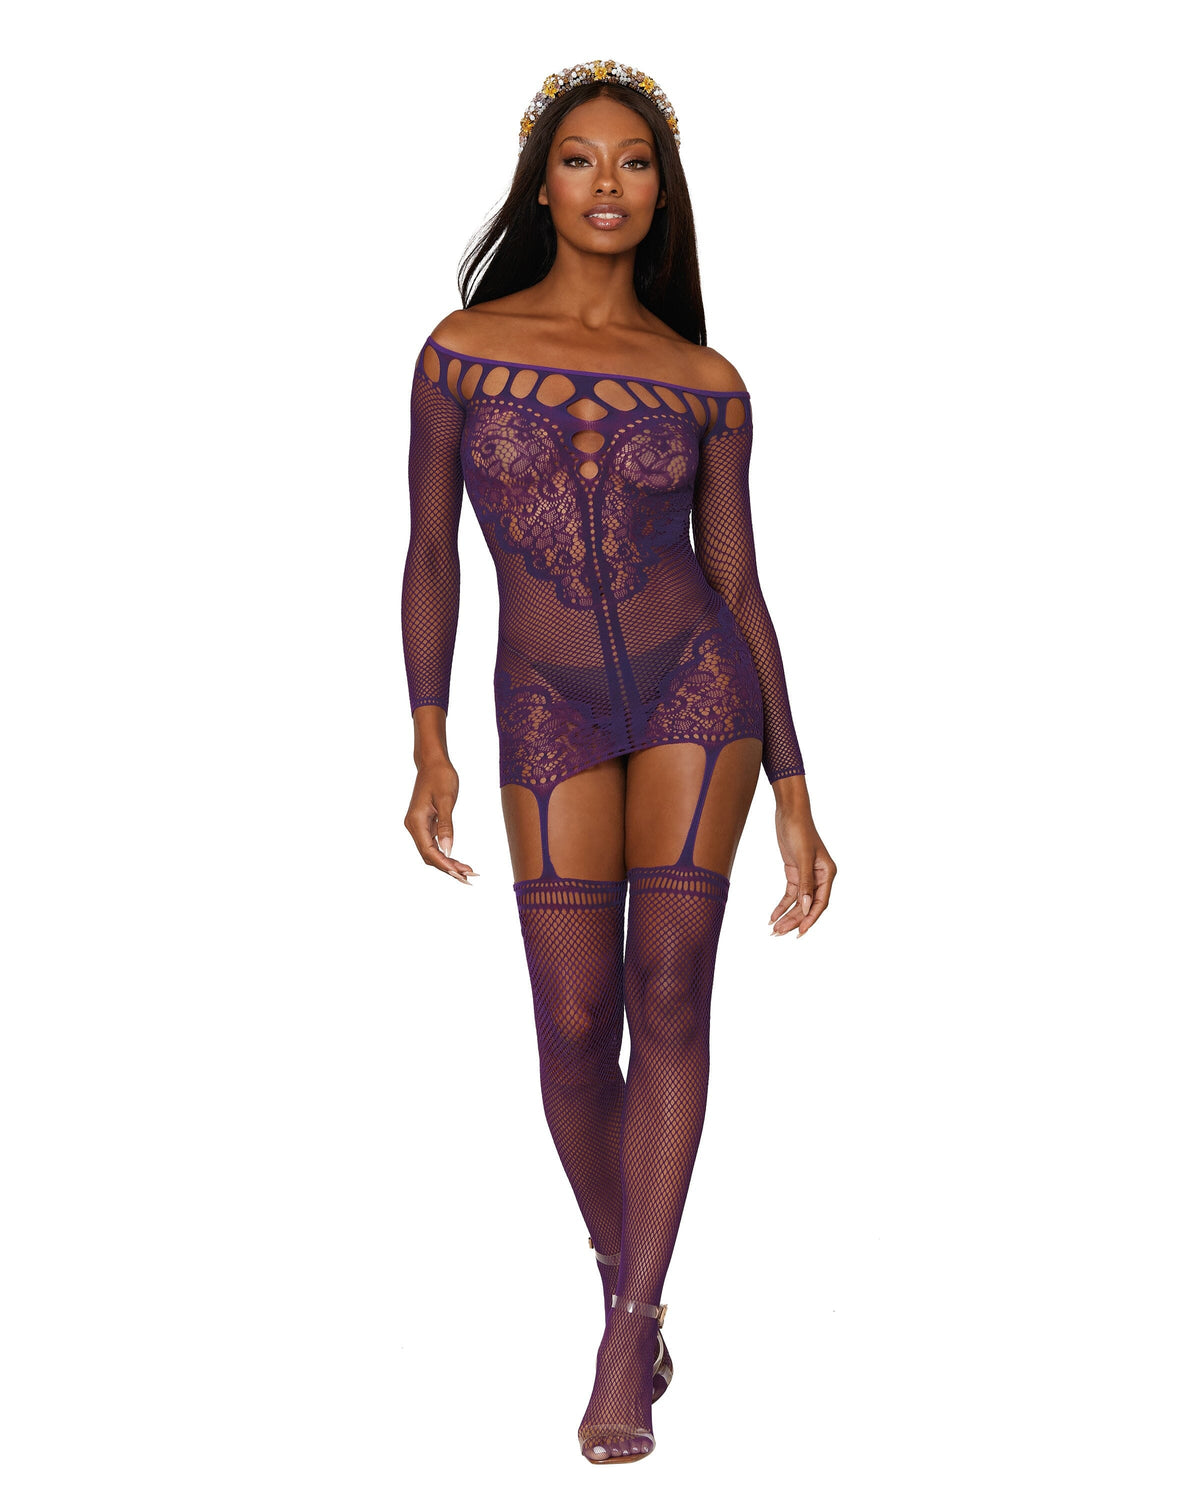 Fishnet and decorative scalloped lace garter dress with attached fishnet stockings Lingerie Dreamgirl International 